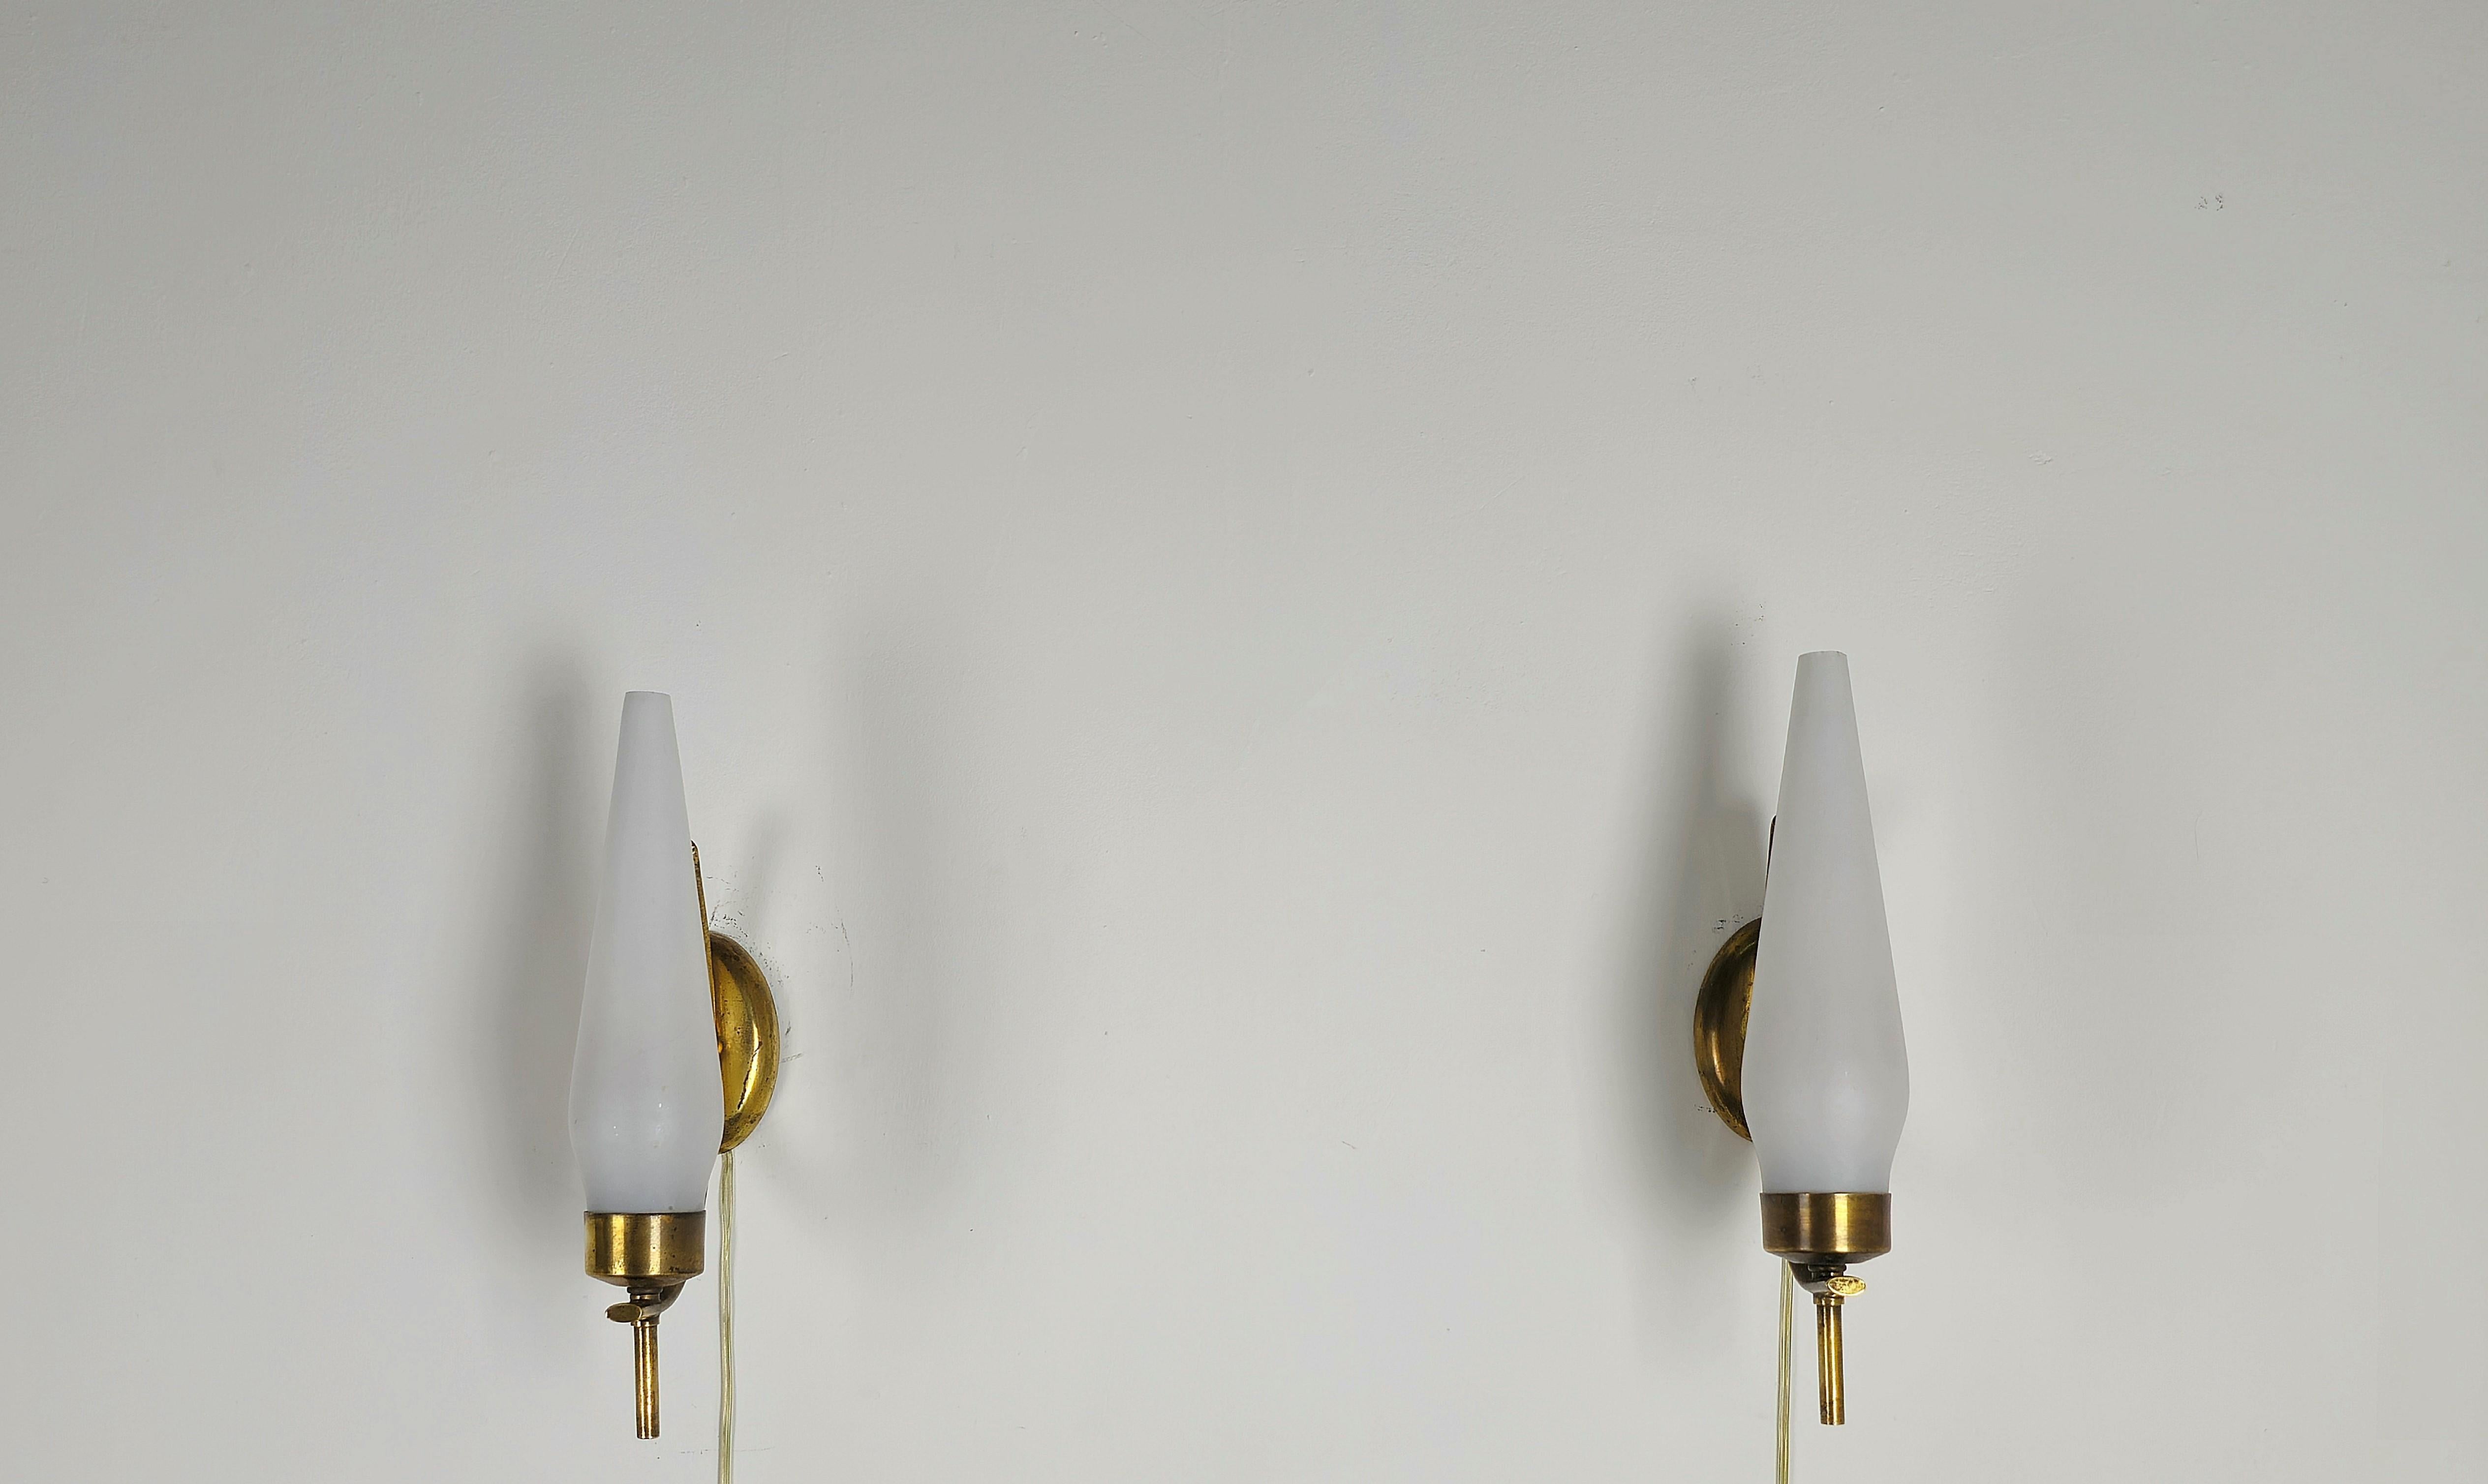 Pair of Wall Lights Sconces Brass Opaline Glass Midcentury Italian Design 1960s  For Sale 4